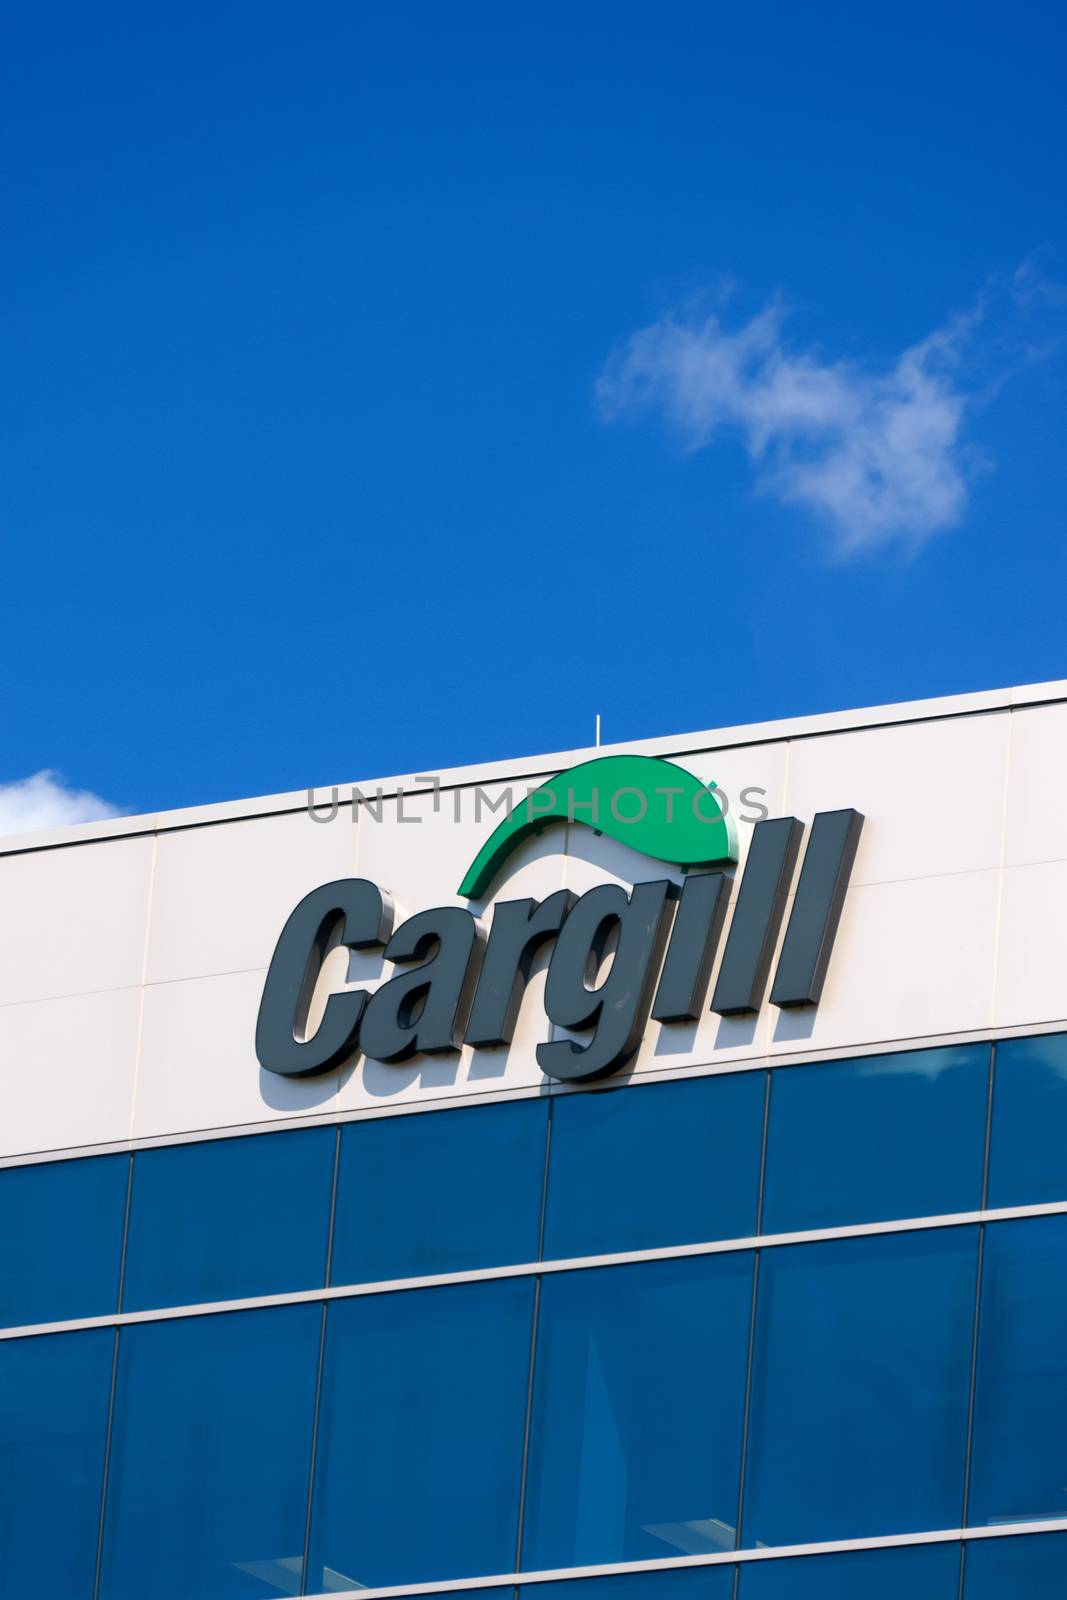 Cargill Corporate Headquarters and Sign by wolterk